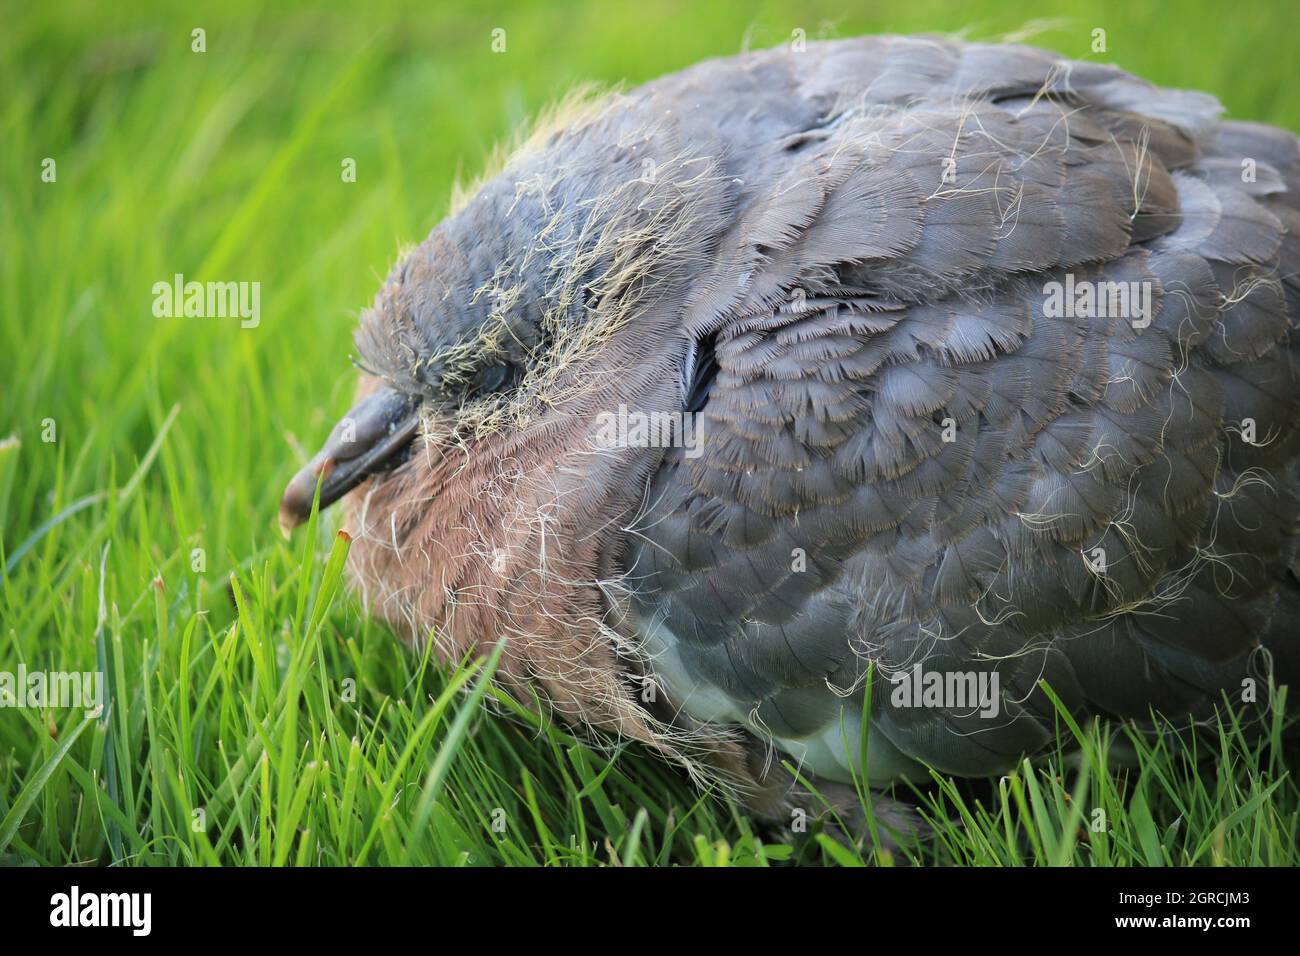 wood pigeon baby bird fledgling nestling with feathers and remaining yellow fluff Stock Photo